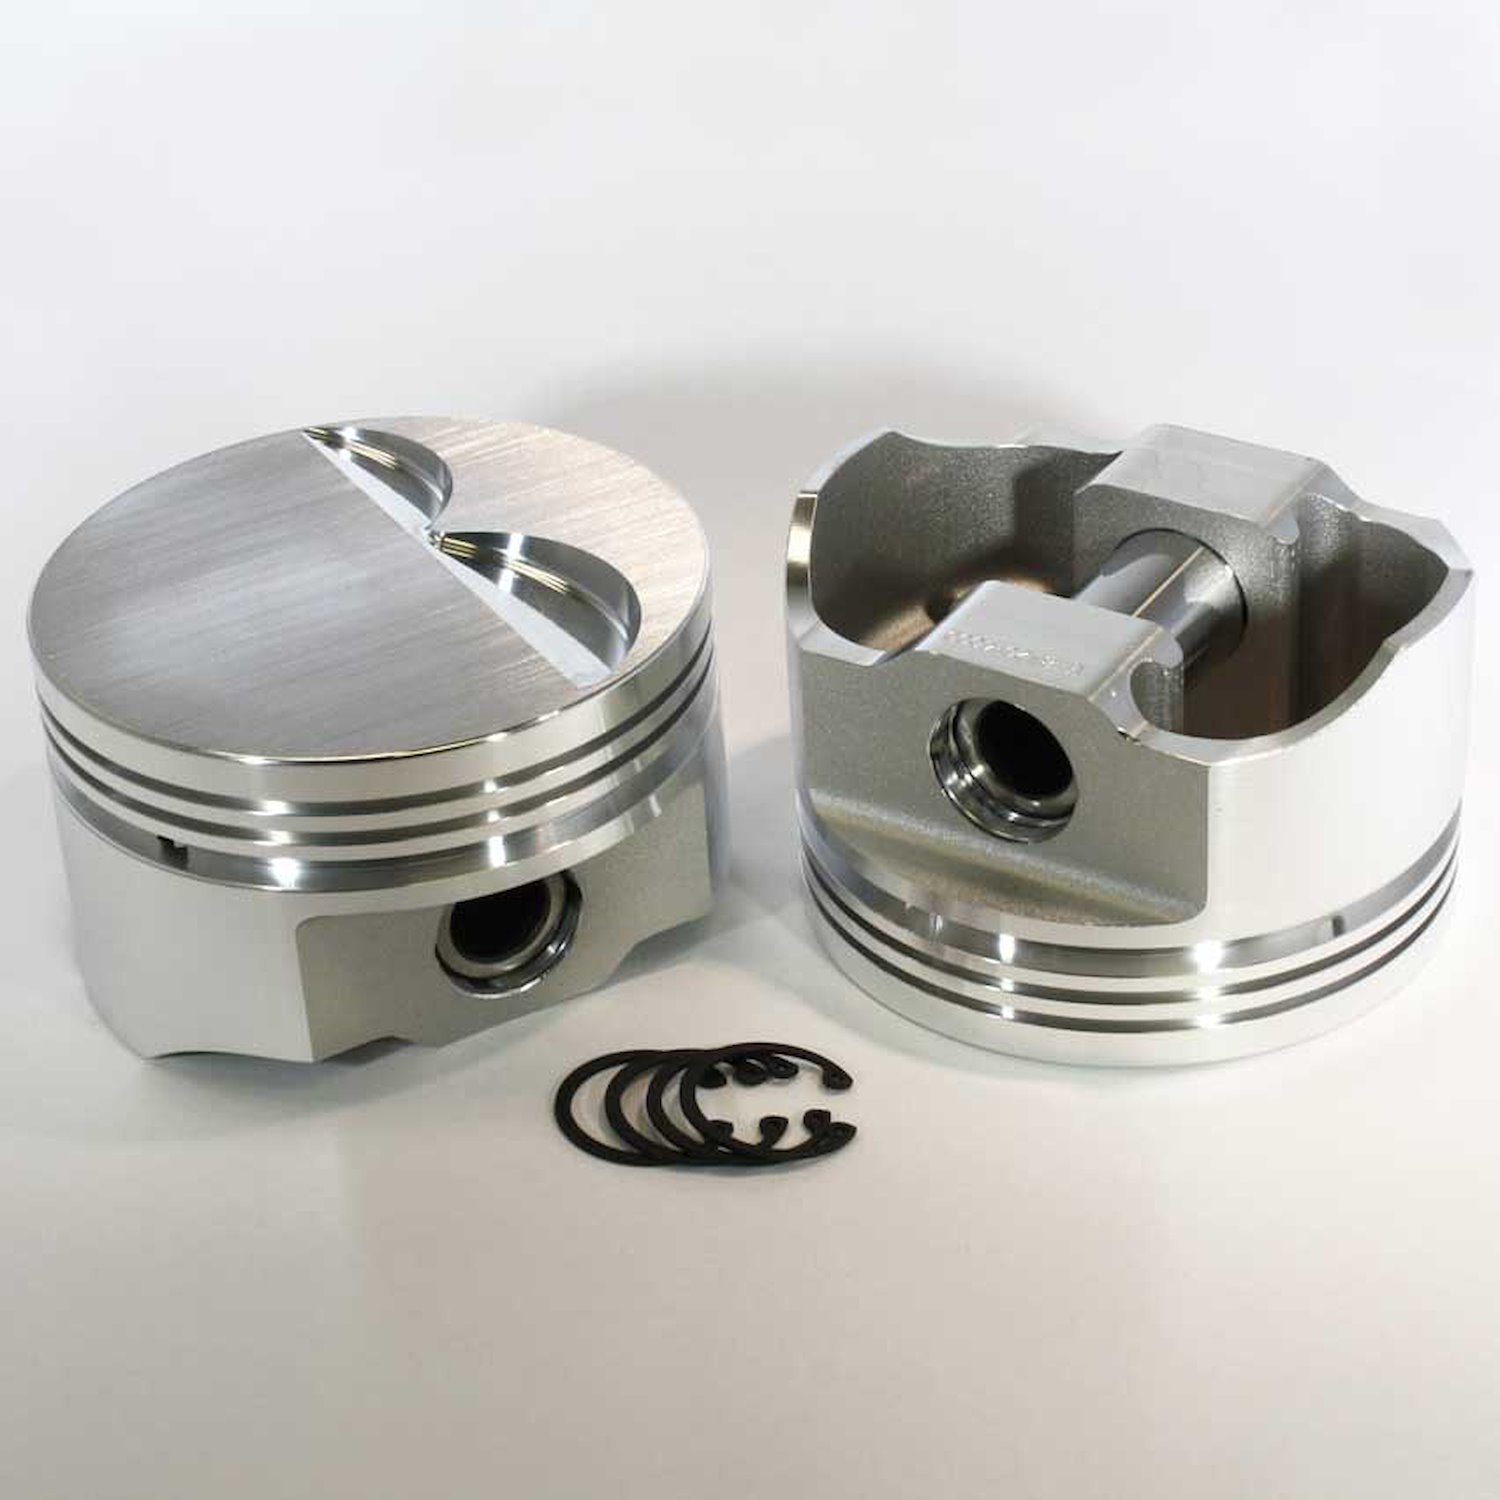 8770-3785 E-Series Flat Top Piston Set for 1997-2005 Chevy LS, 3.785 in. Bore, -3cc Volume [OEM Stroke]